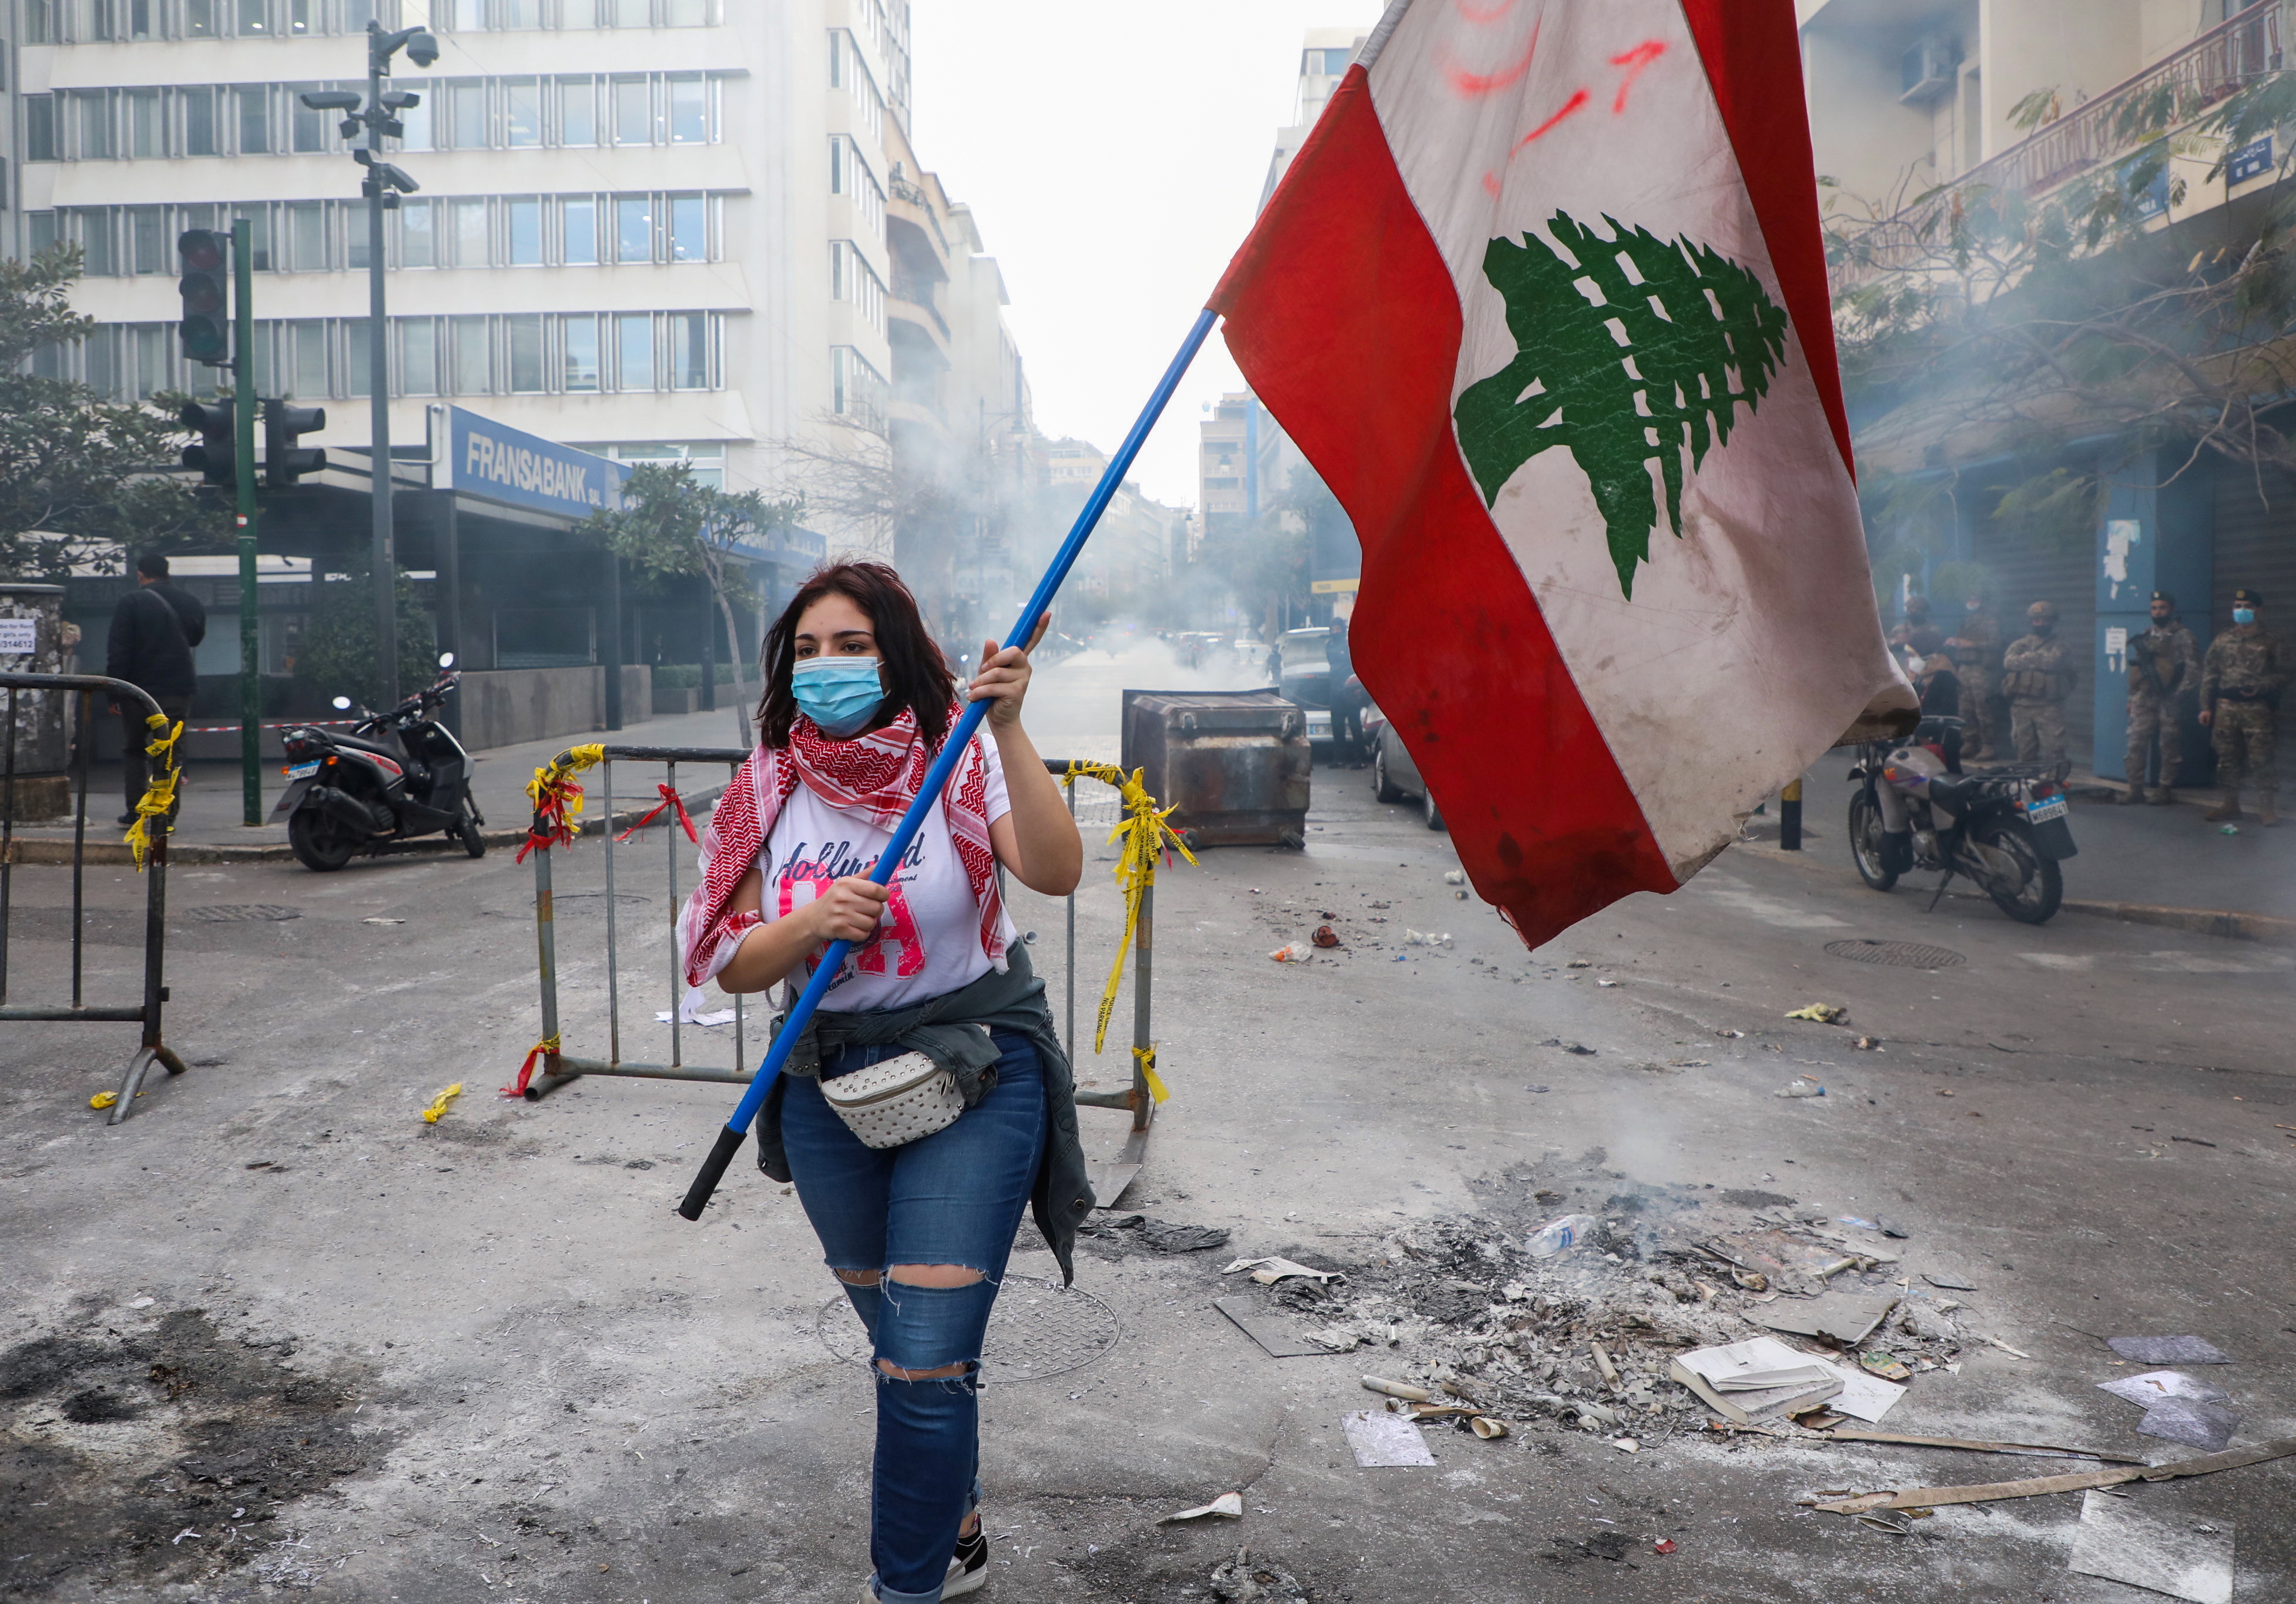 A demonstrator carries a national flag along a blocked road, during a protest against the fall in Lebanese pound currency and mounting economic hardships, near the Central Bank building, in Beirut, Lebanon March 16, 2021. REUTERS/Mohamed Azakir